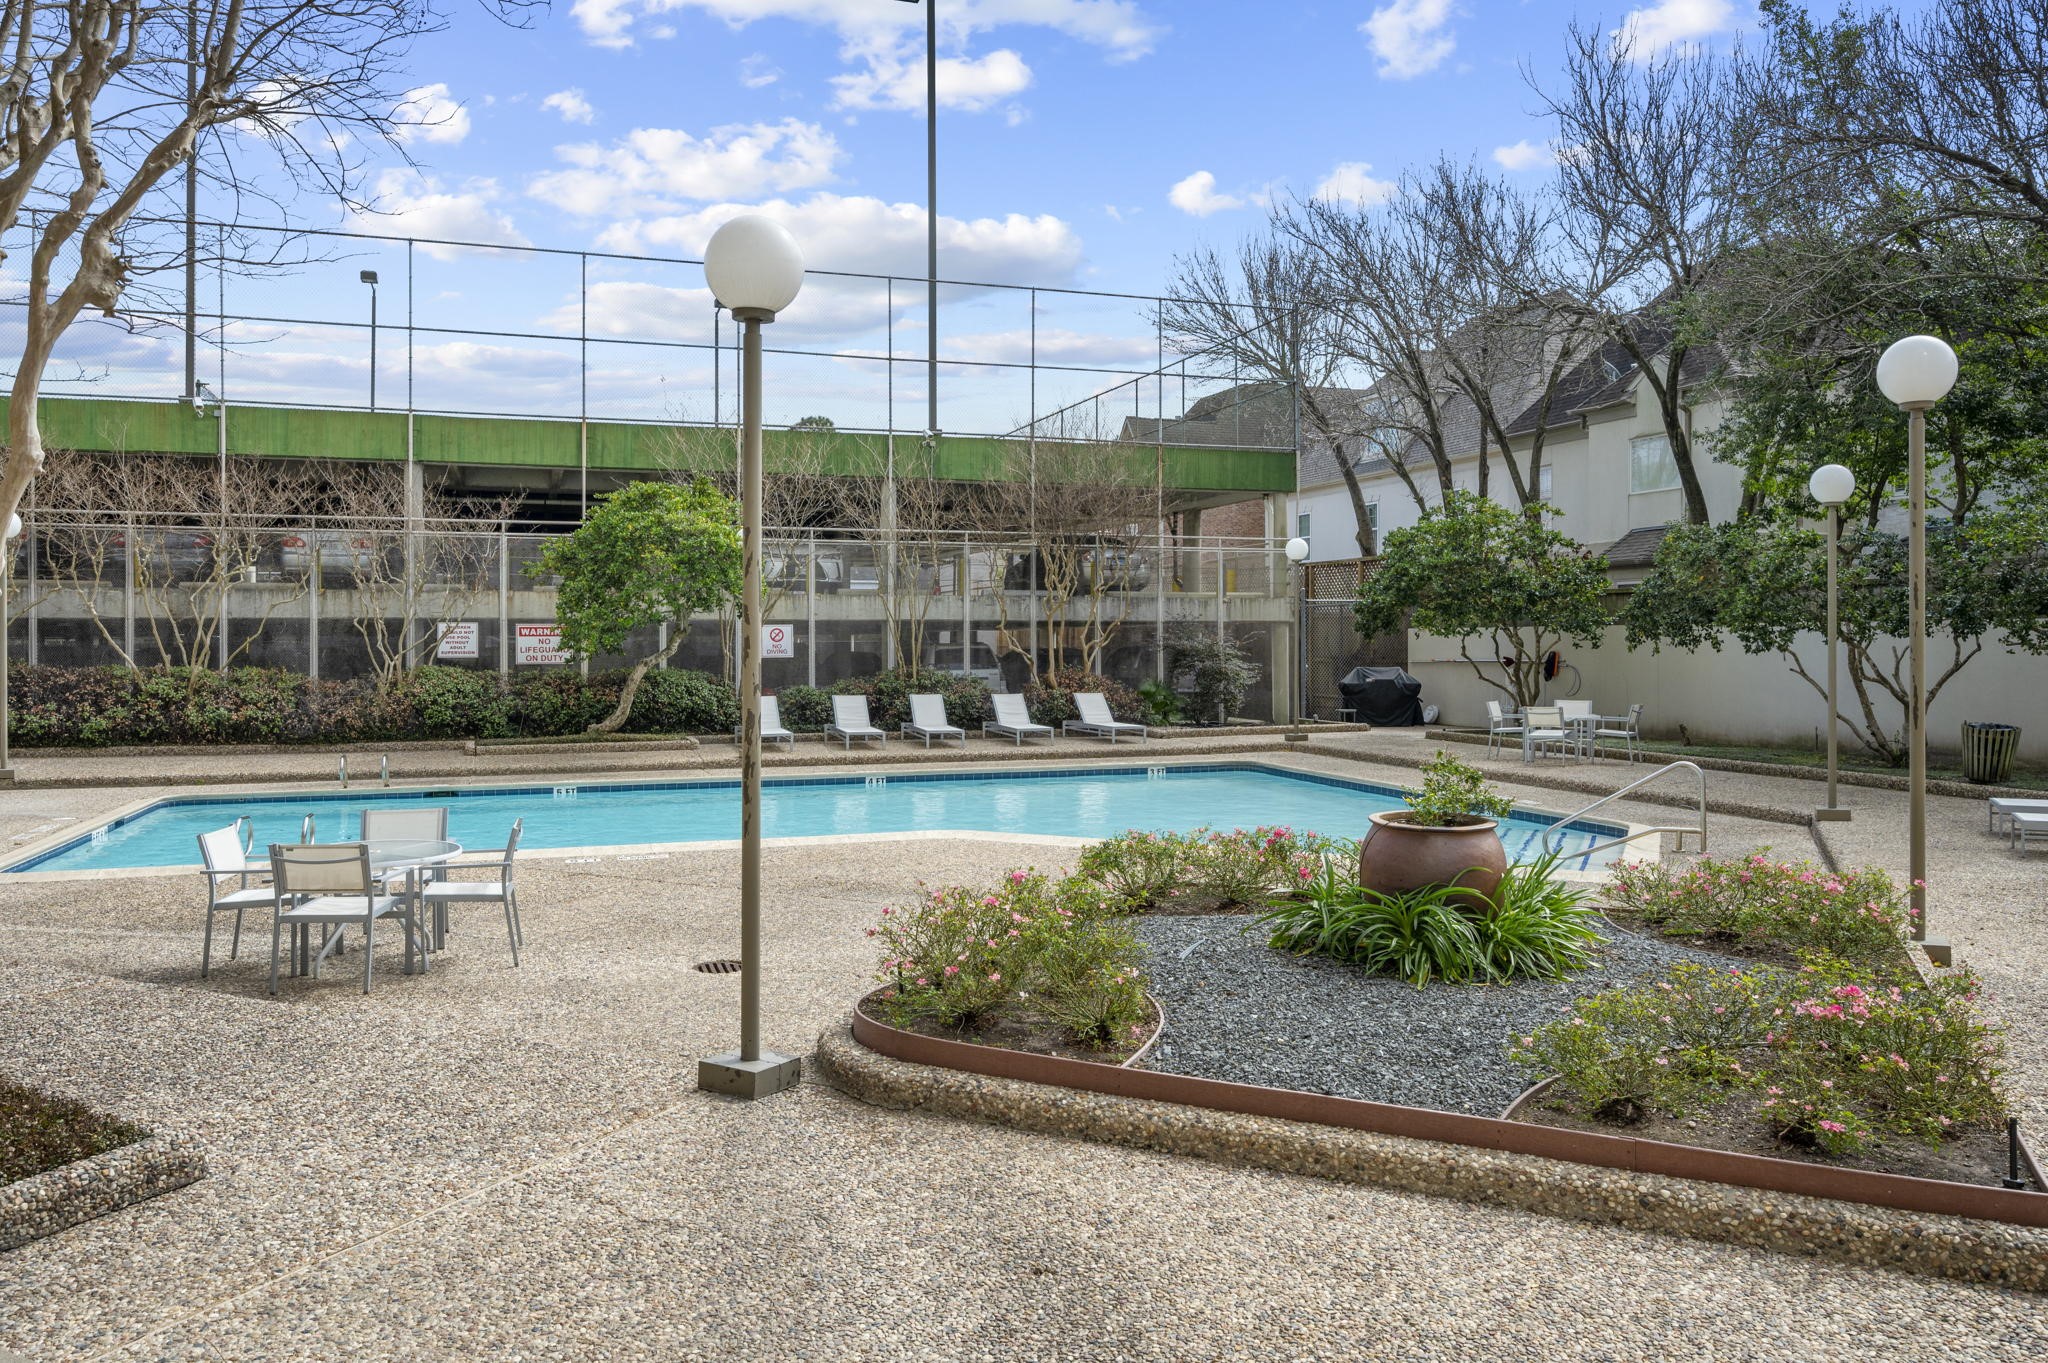 The pool area will make you wish summer lasted year round.  Enjoy plenty of lounging and grilling space!  Visible on the left is the resident parking area with Pickle Ball Court on the rooftop.  Unit 1303 includes 2 prime 1st floor reserved parking spots.